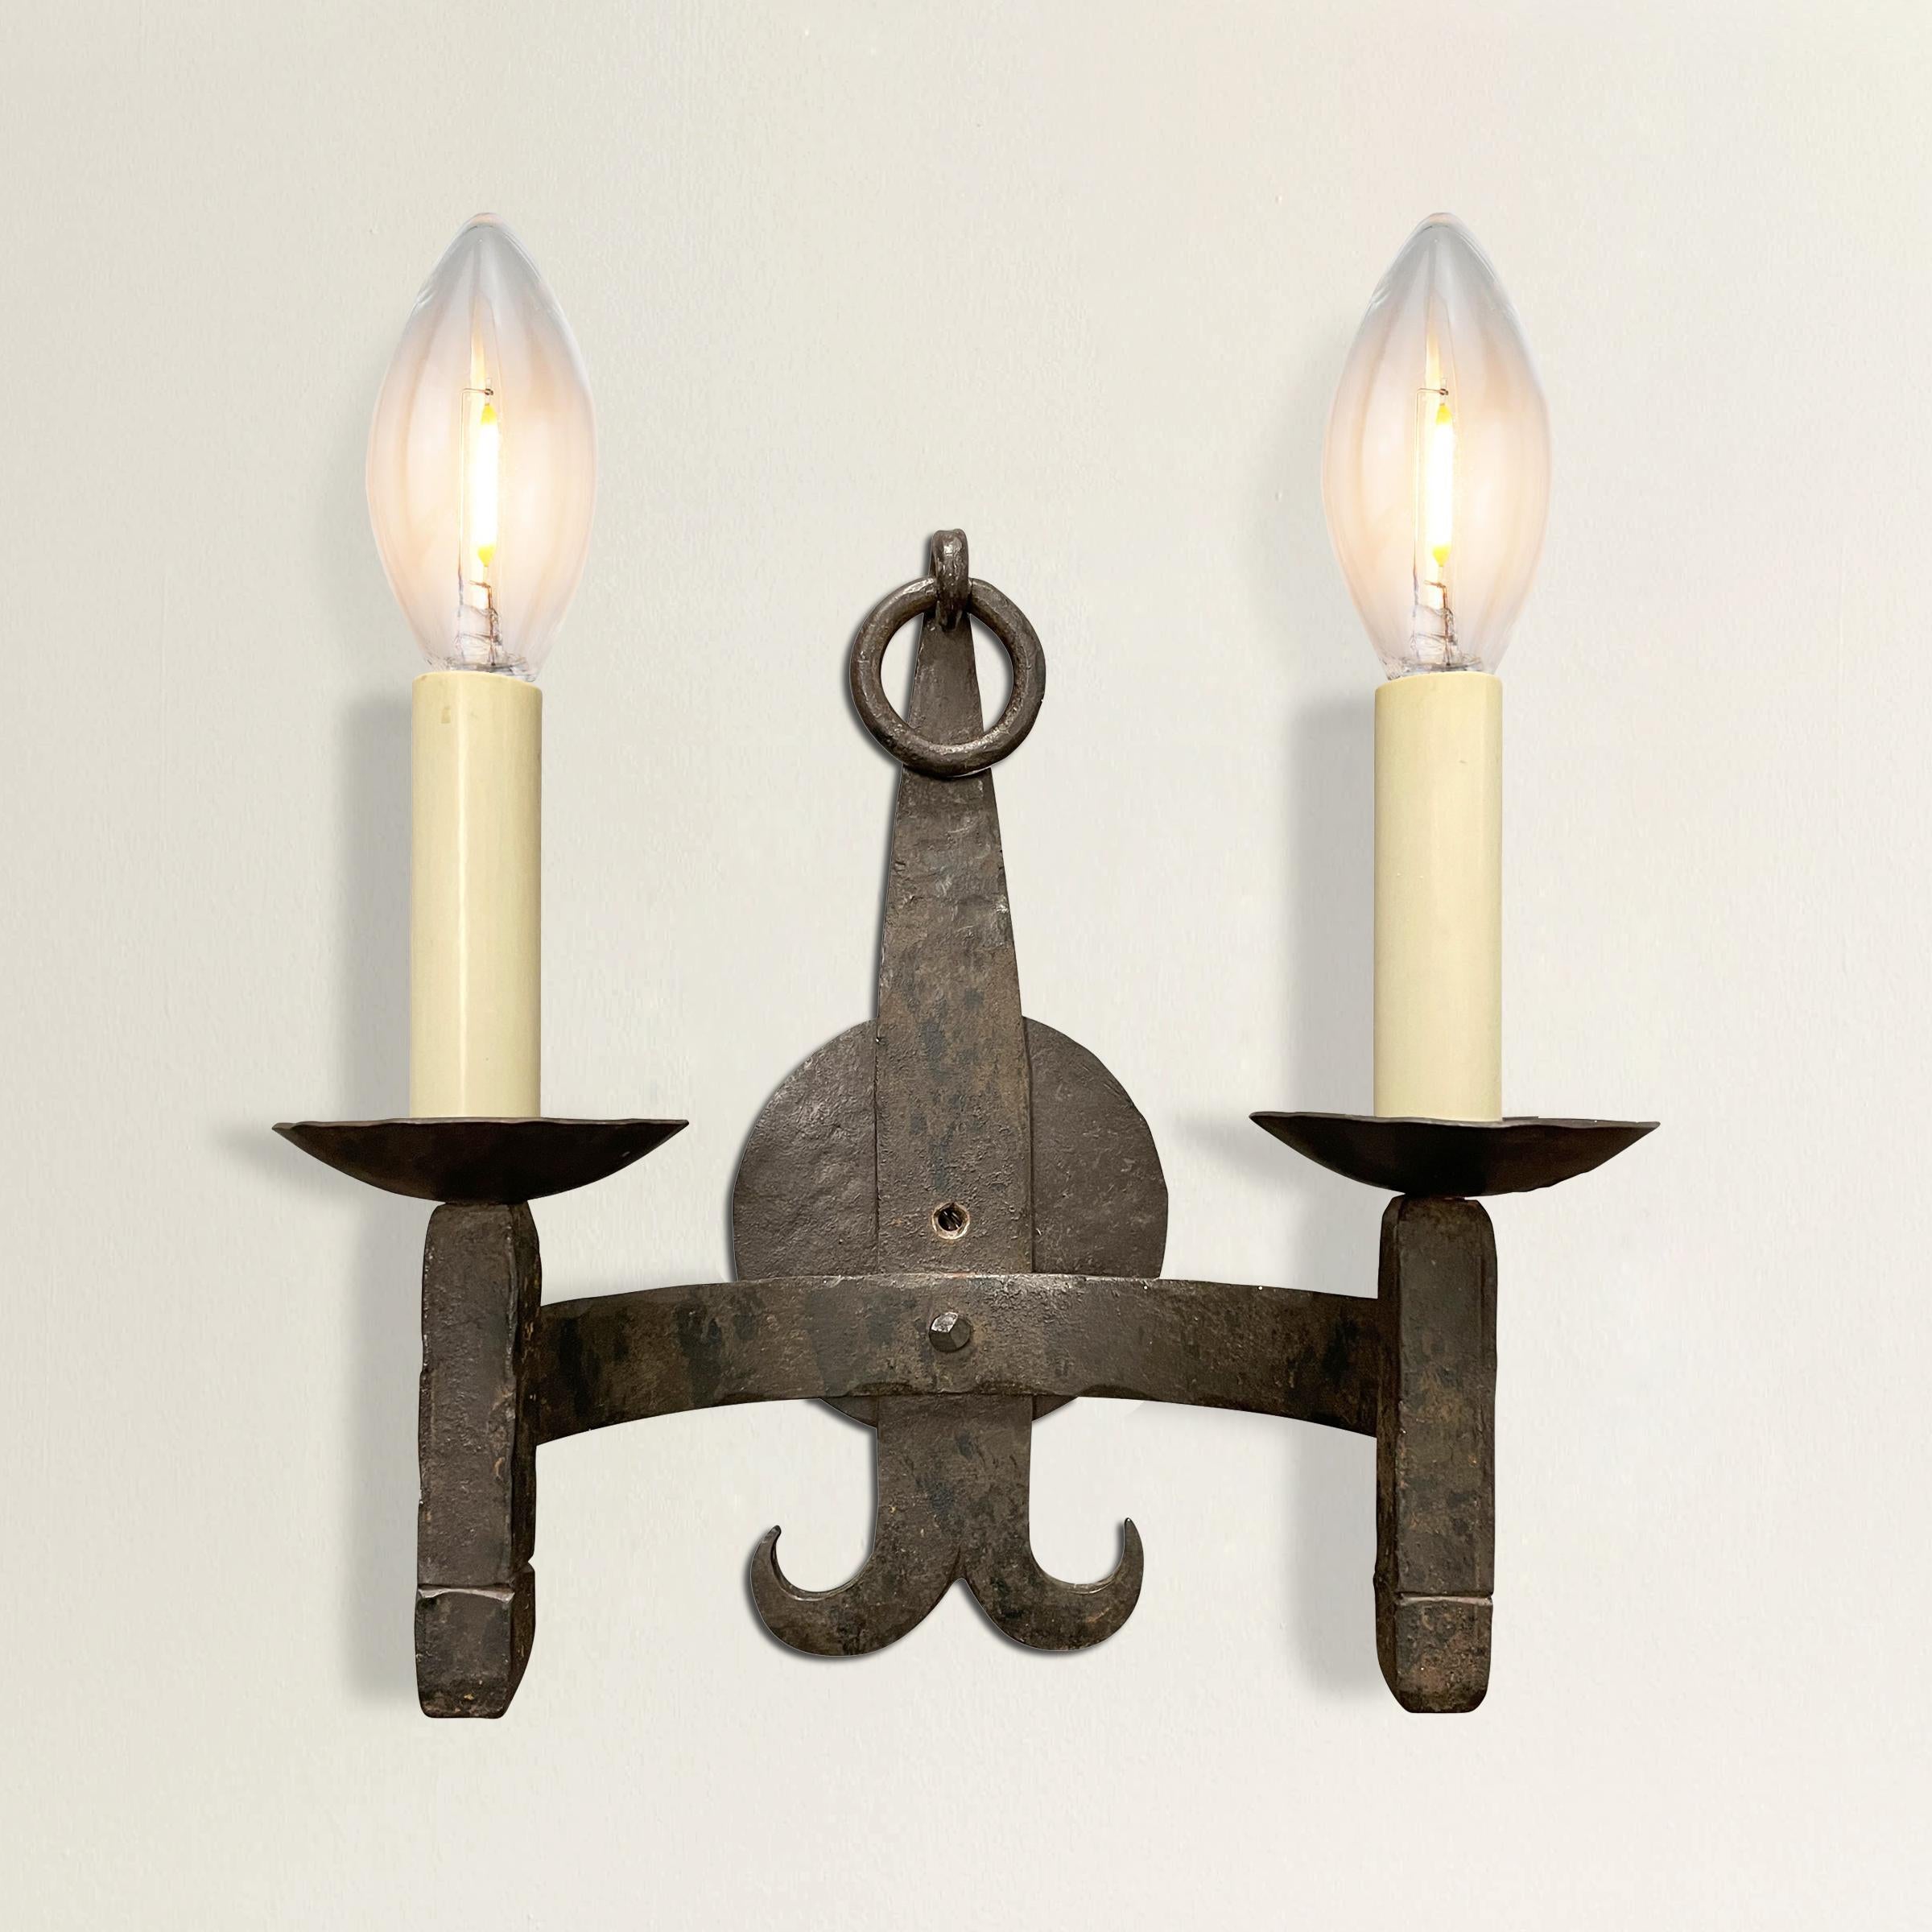 A fabulous pair of mid-20th century American handwrought iron two-arm sconces with square candles held by curved arms, and round back-plates with rings hanging from the tops, and curled bottom ends. Wired for US, and utilizing candelabra size bulbs.